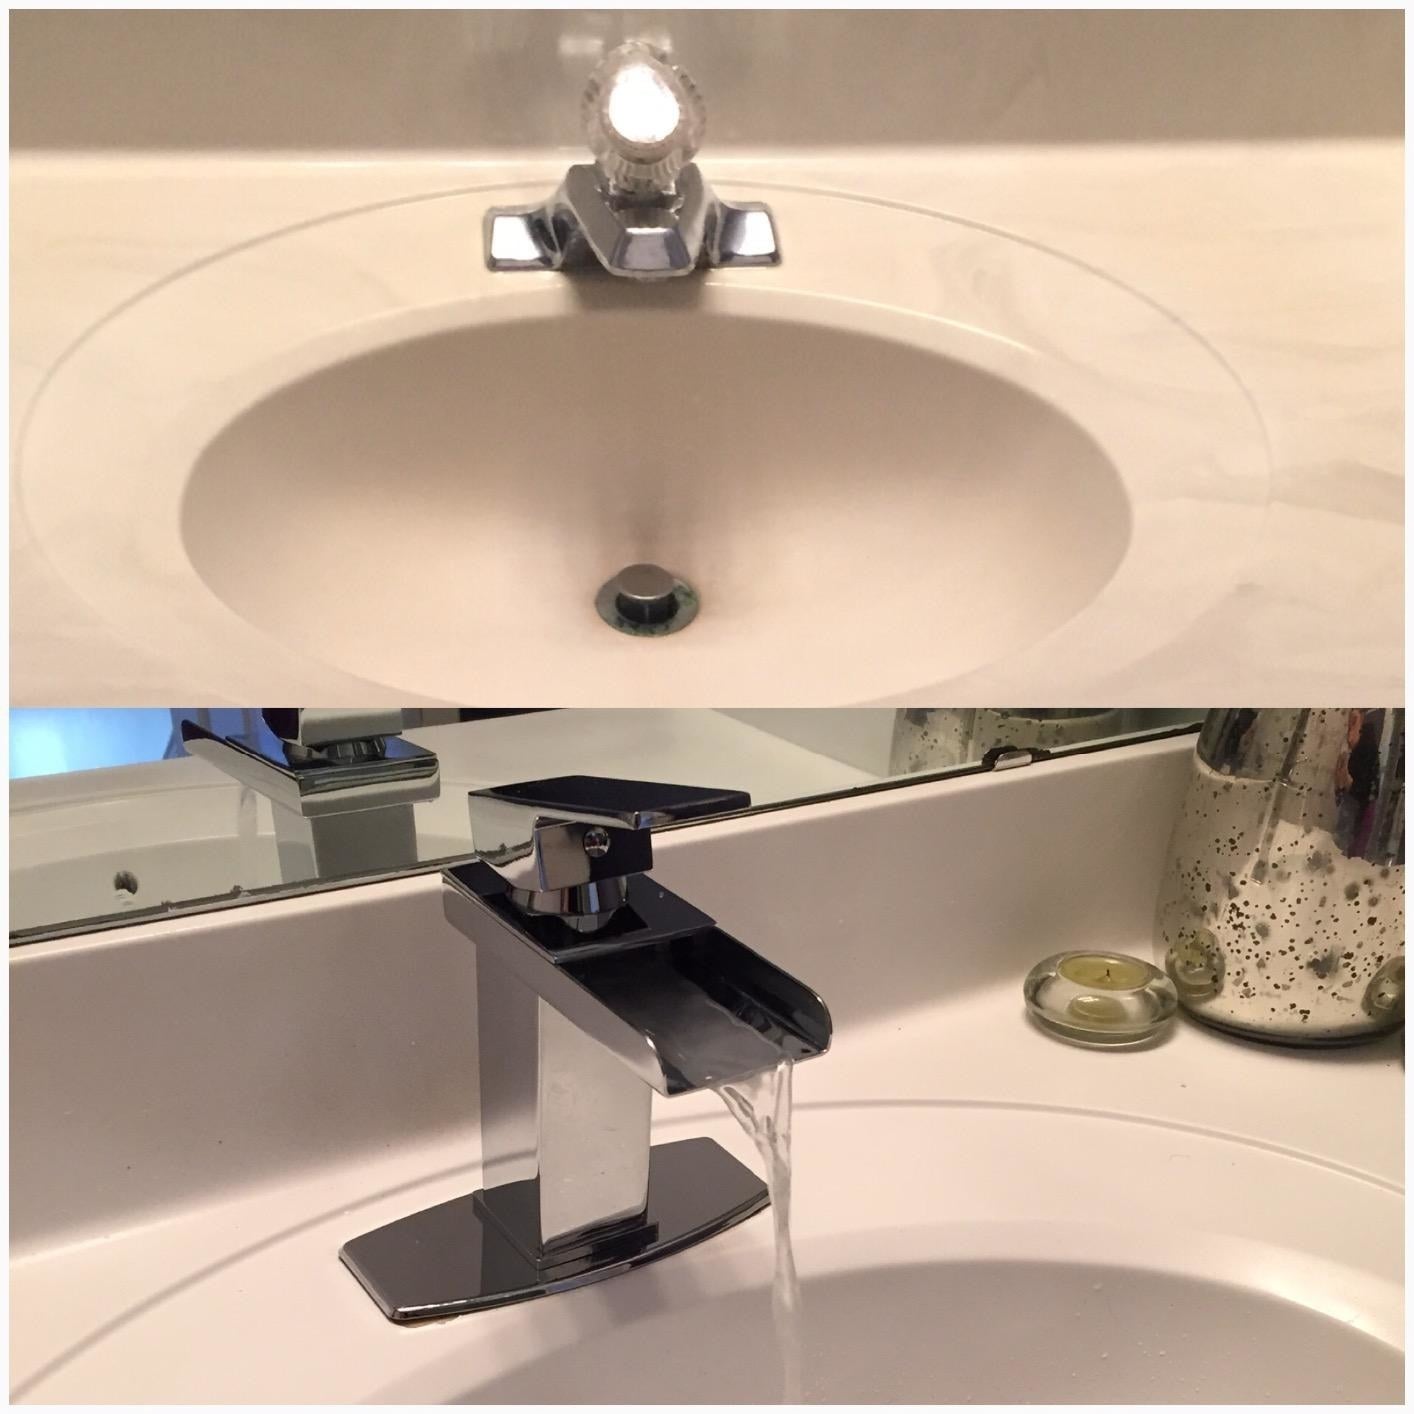 reviewer image of the faucet in their bathroom sink